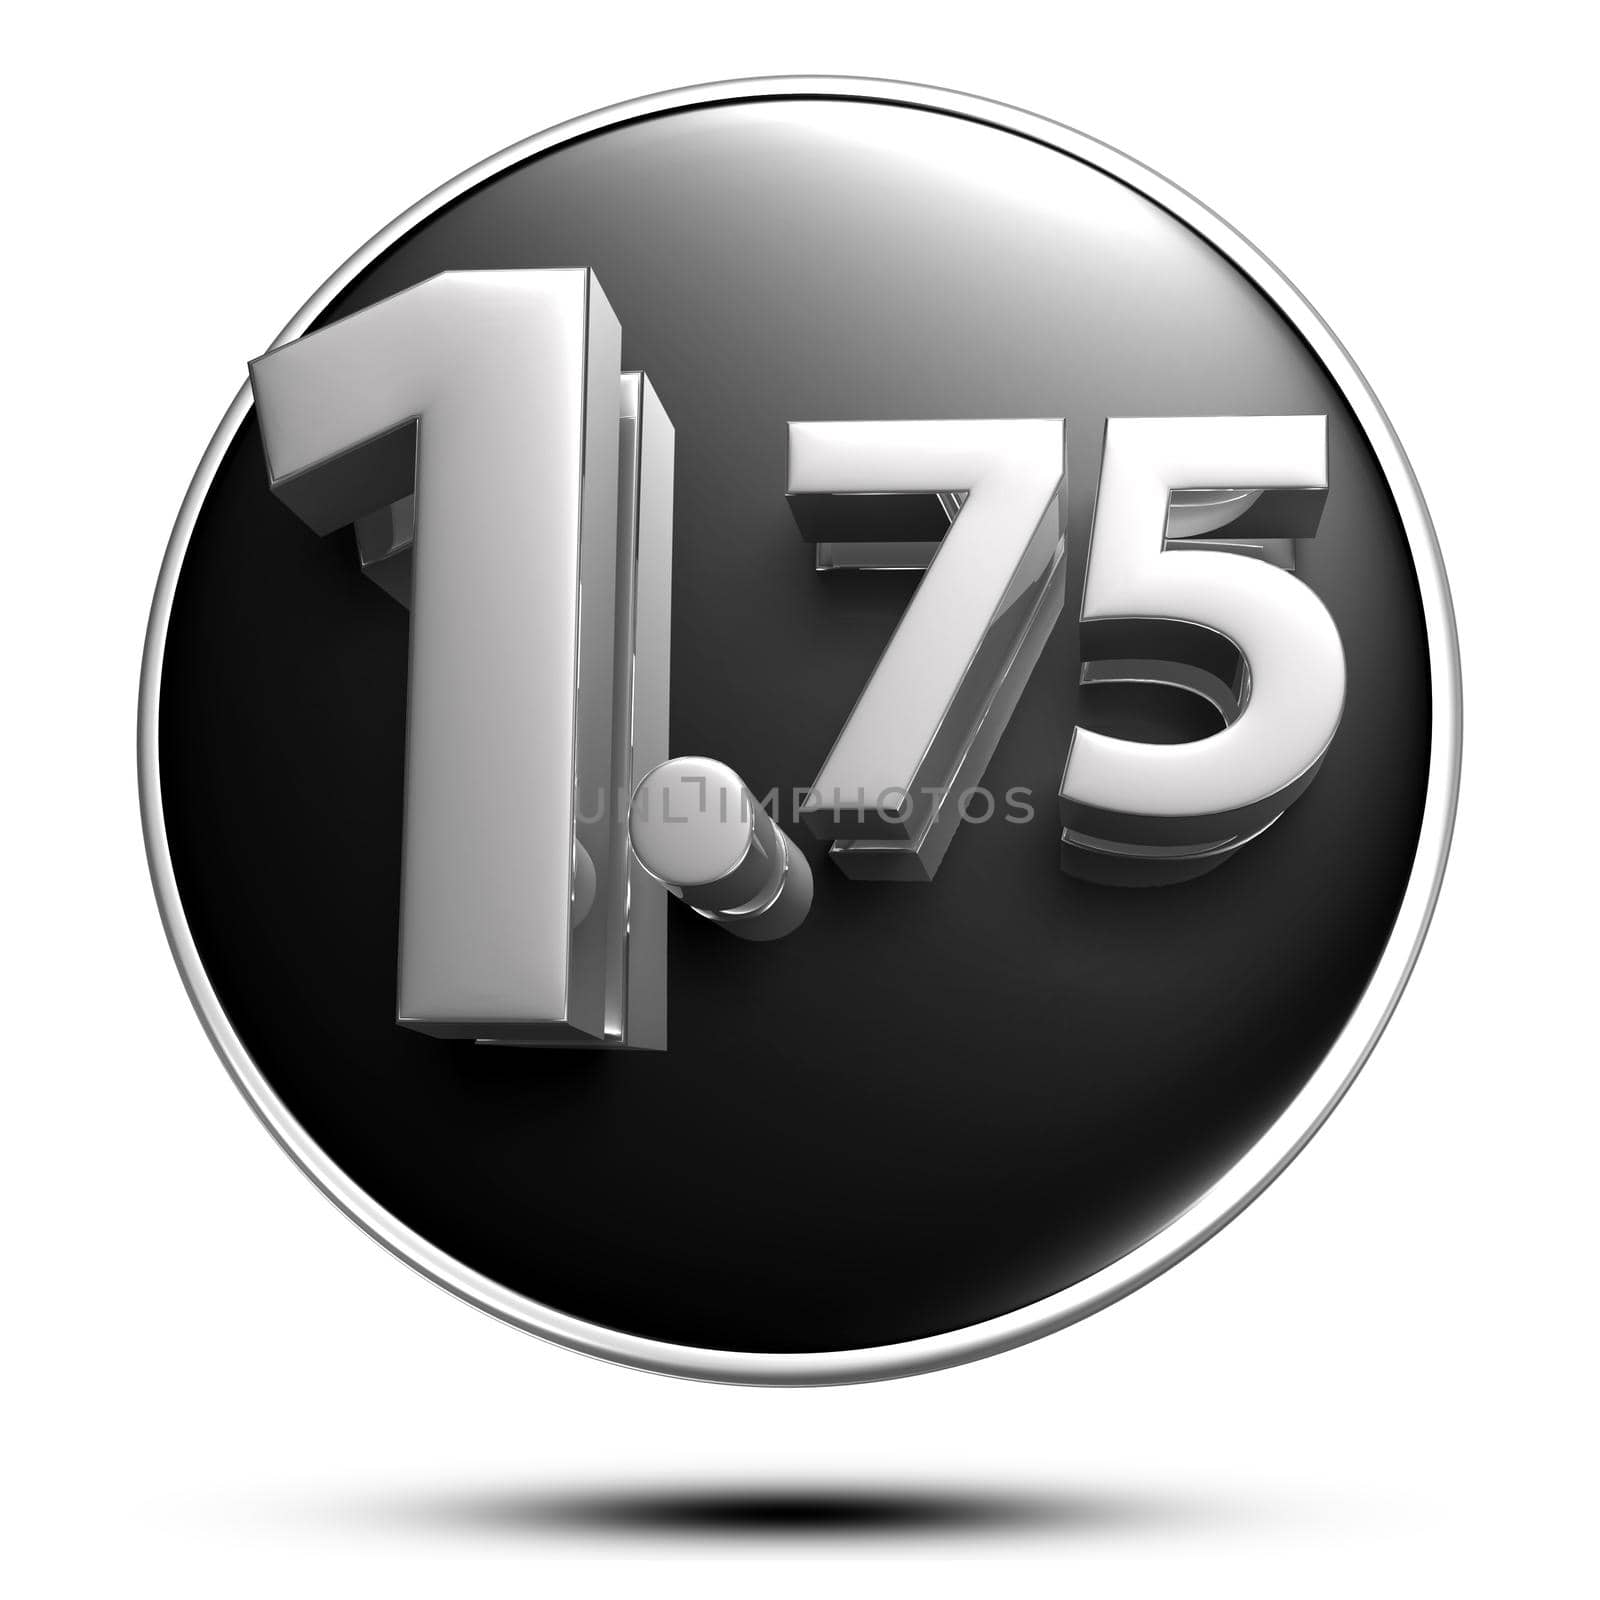 1.75 numbers 3D illustration on white background with clipping path. by thitimontoyai